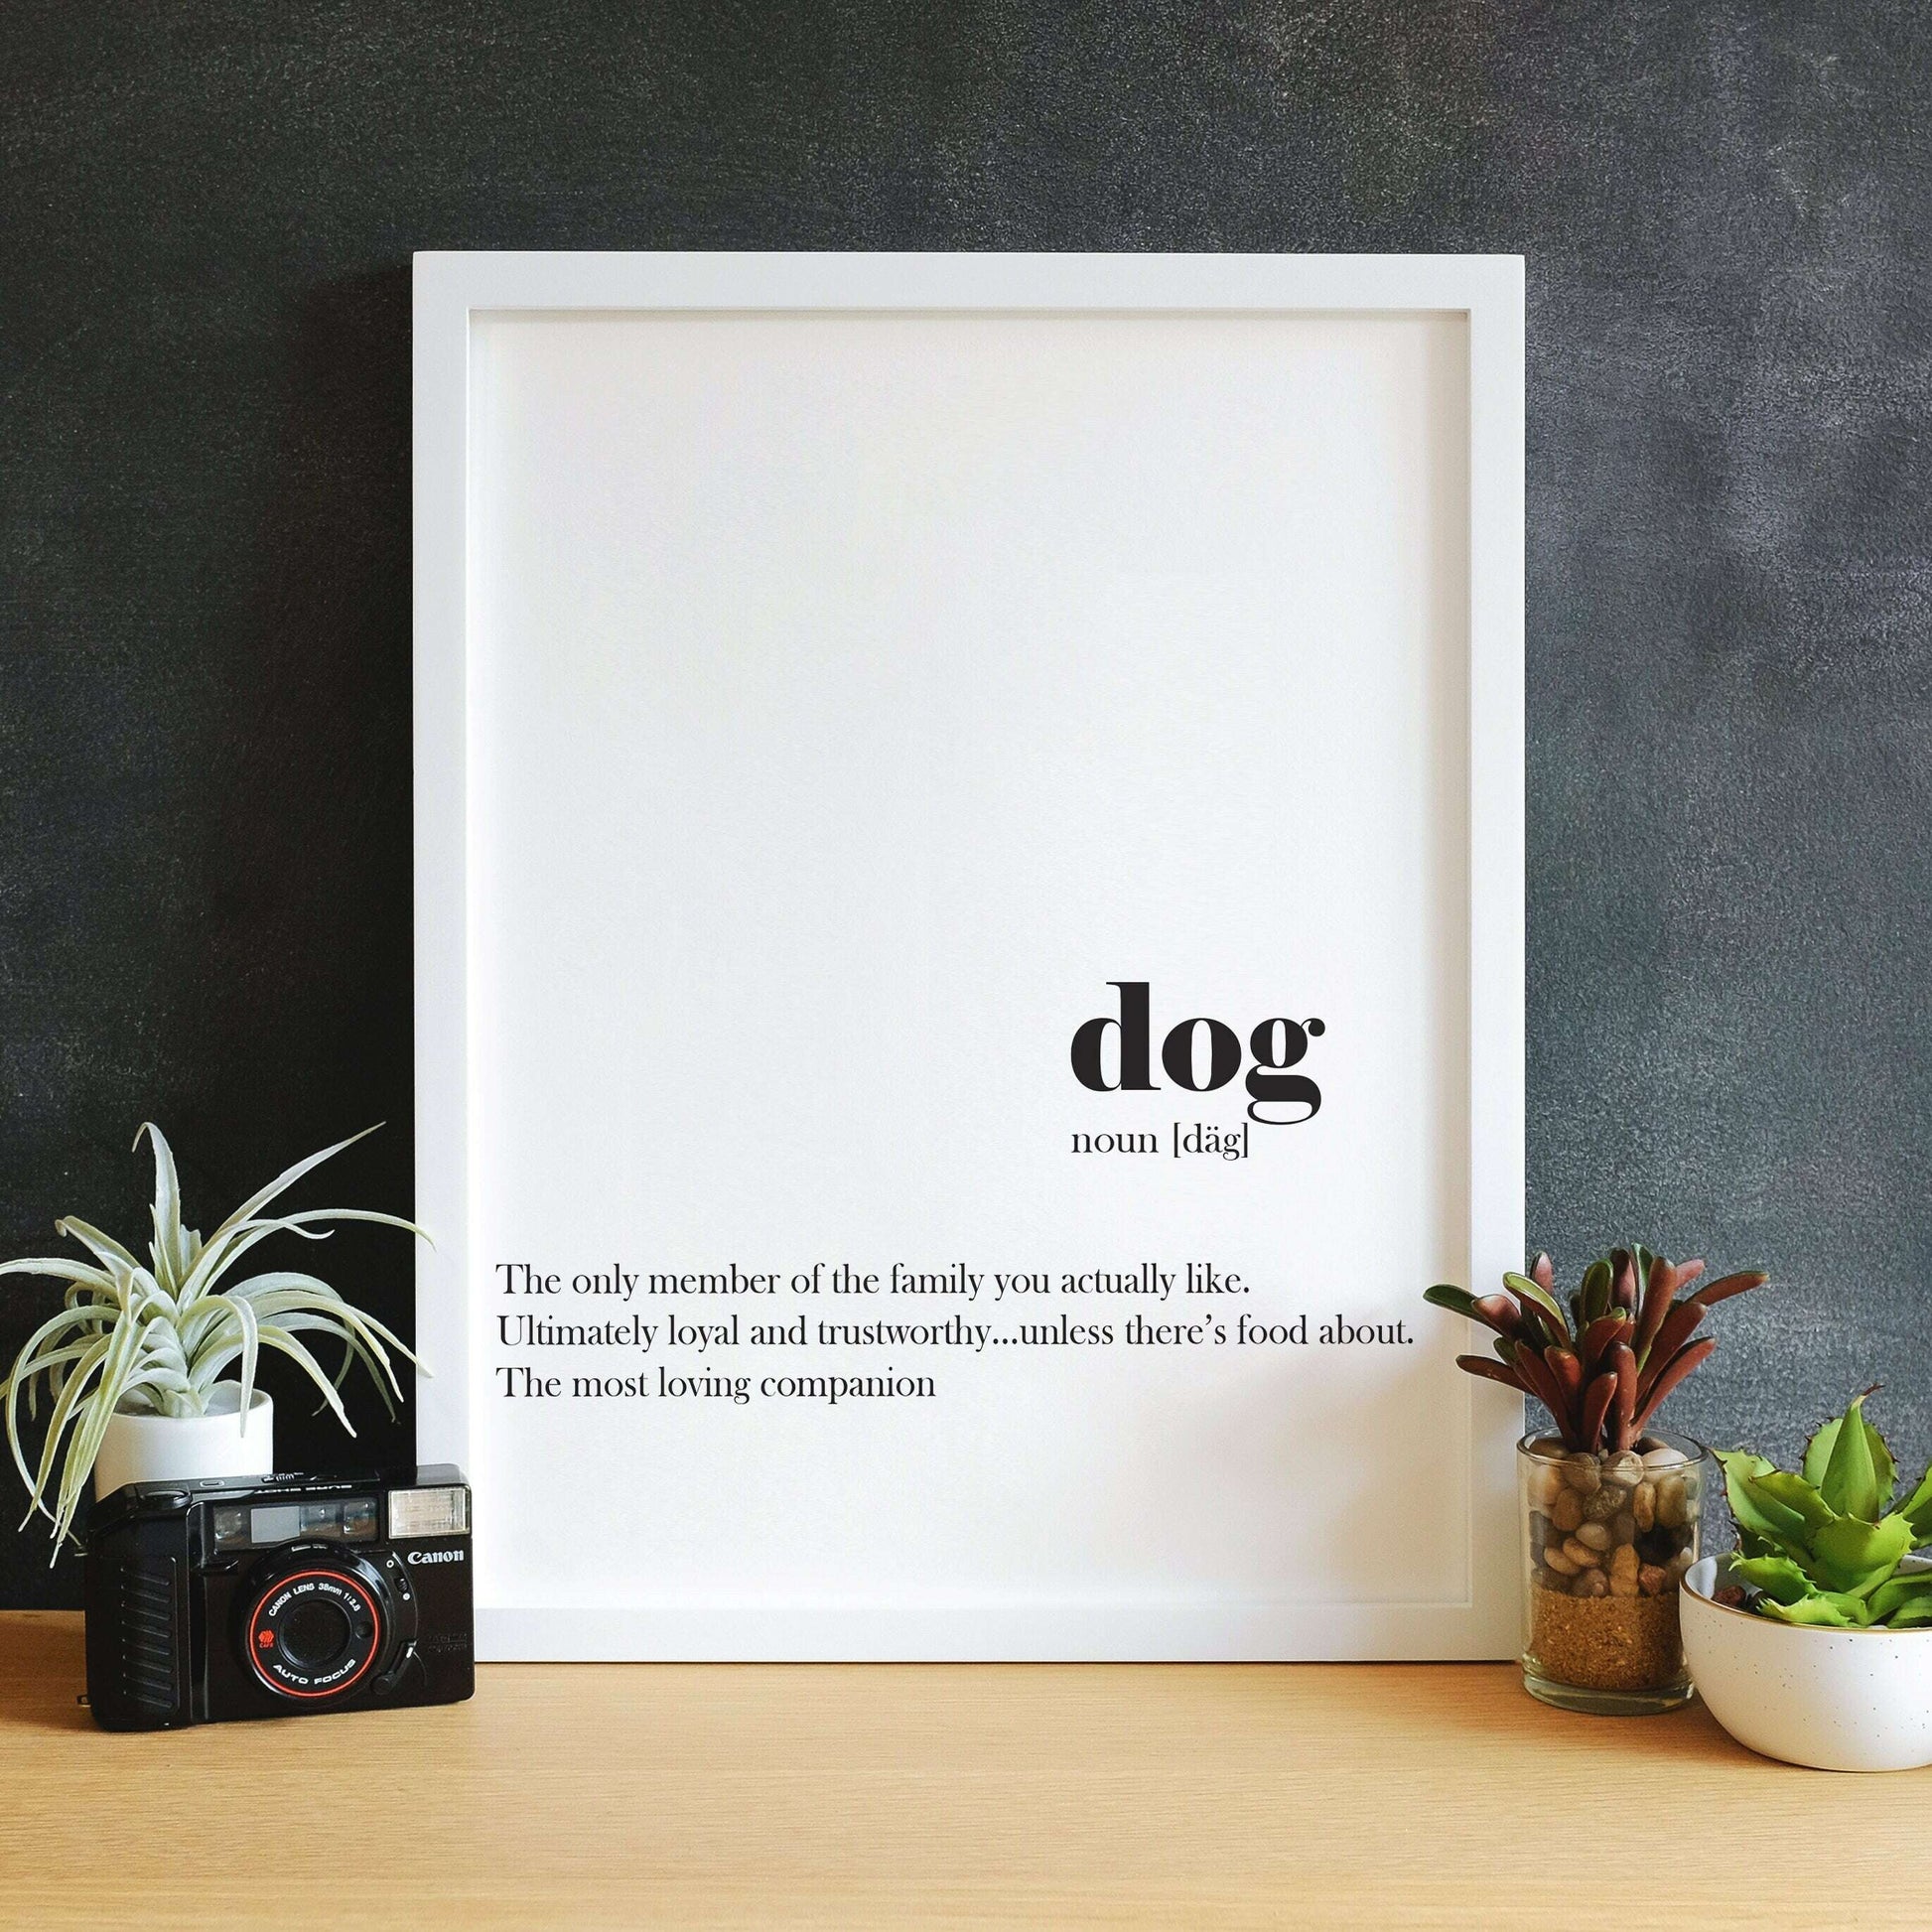 Framed Dog definition print, dog art quote prints quote prints